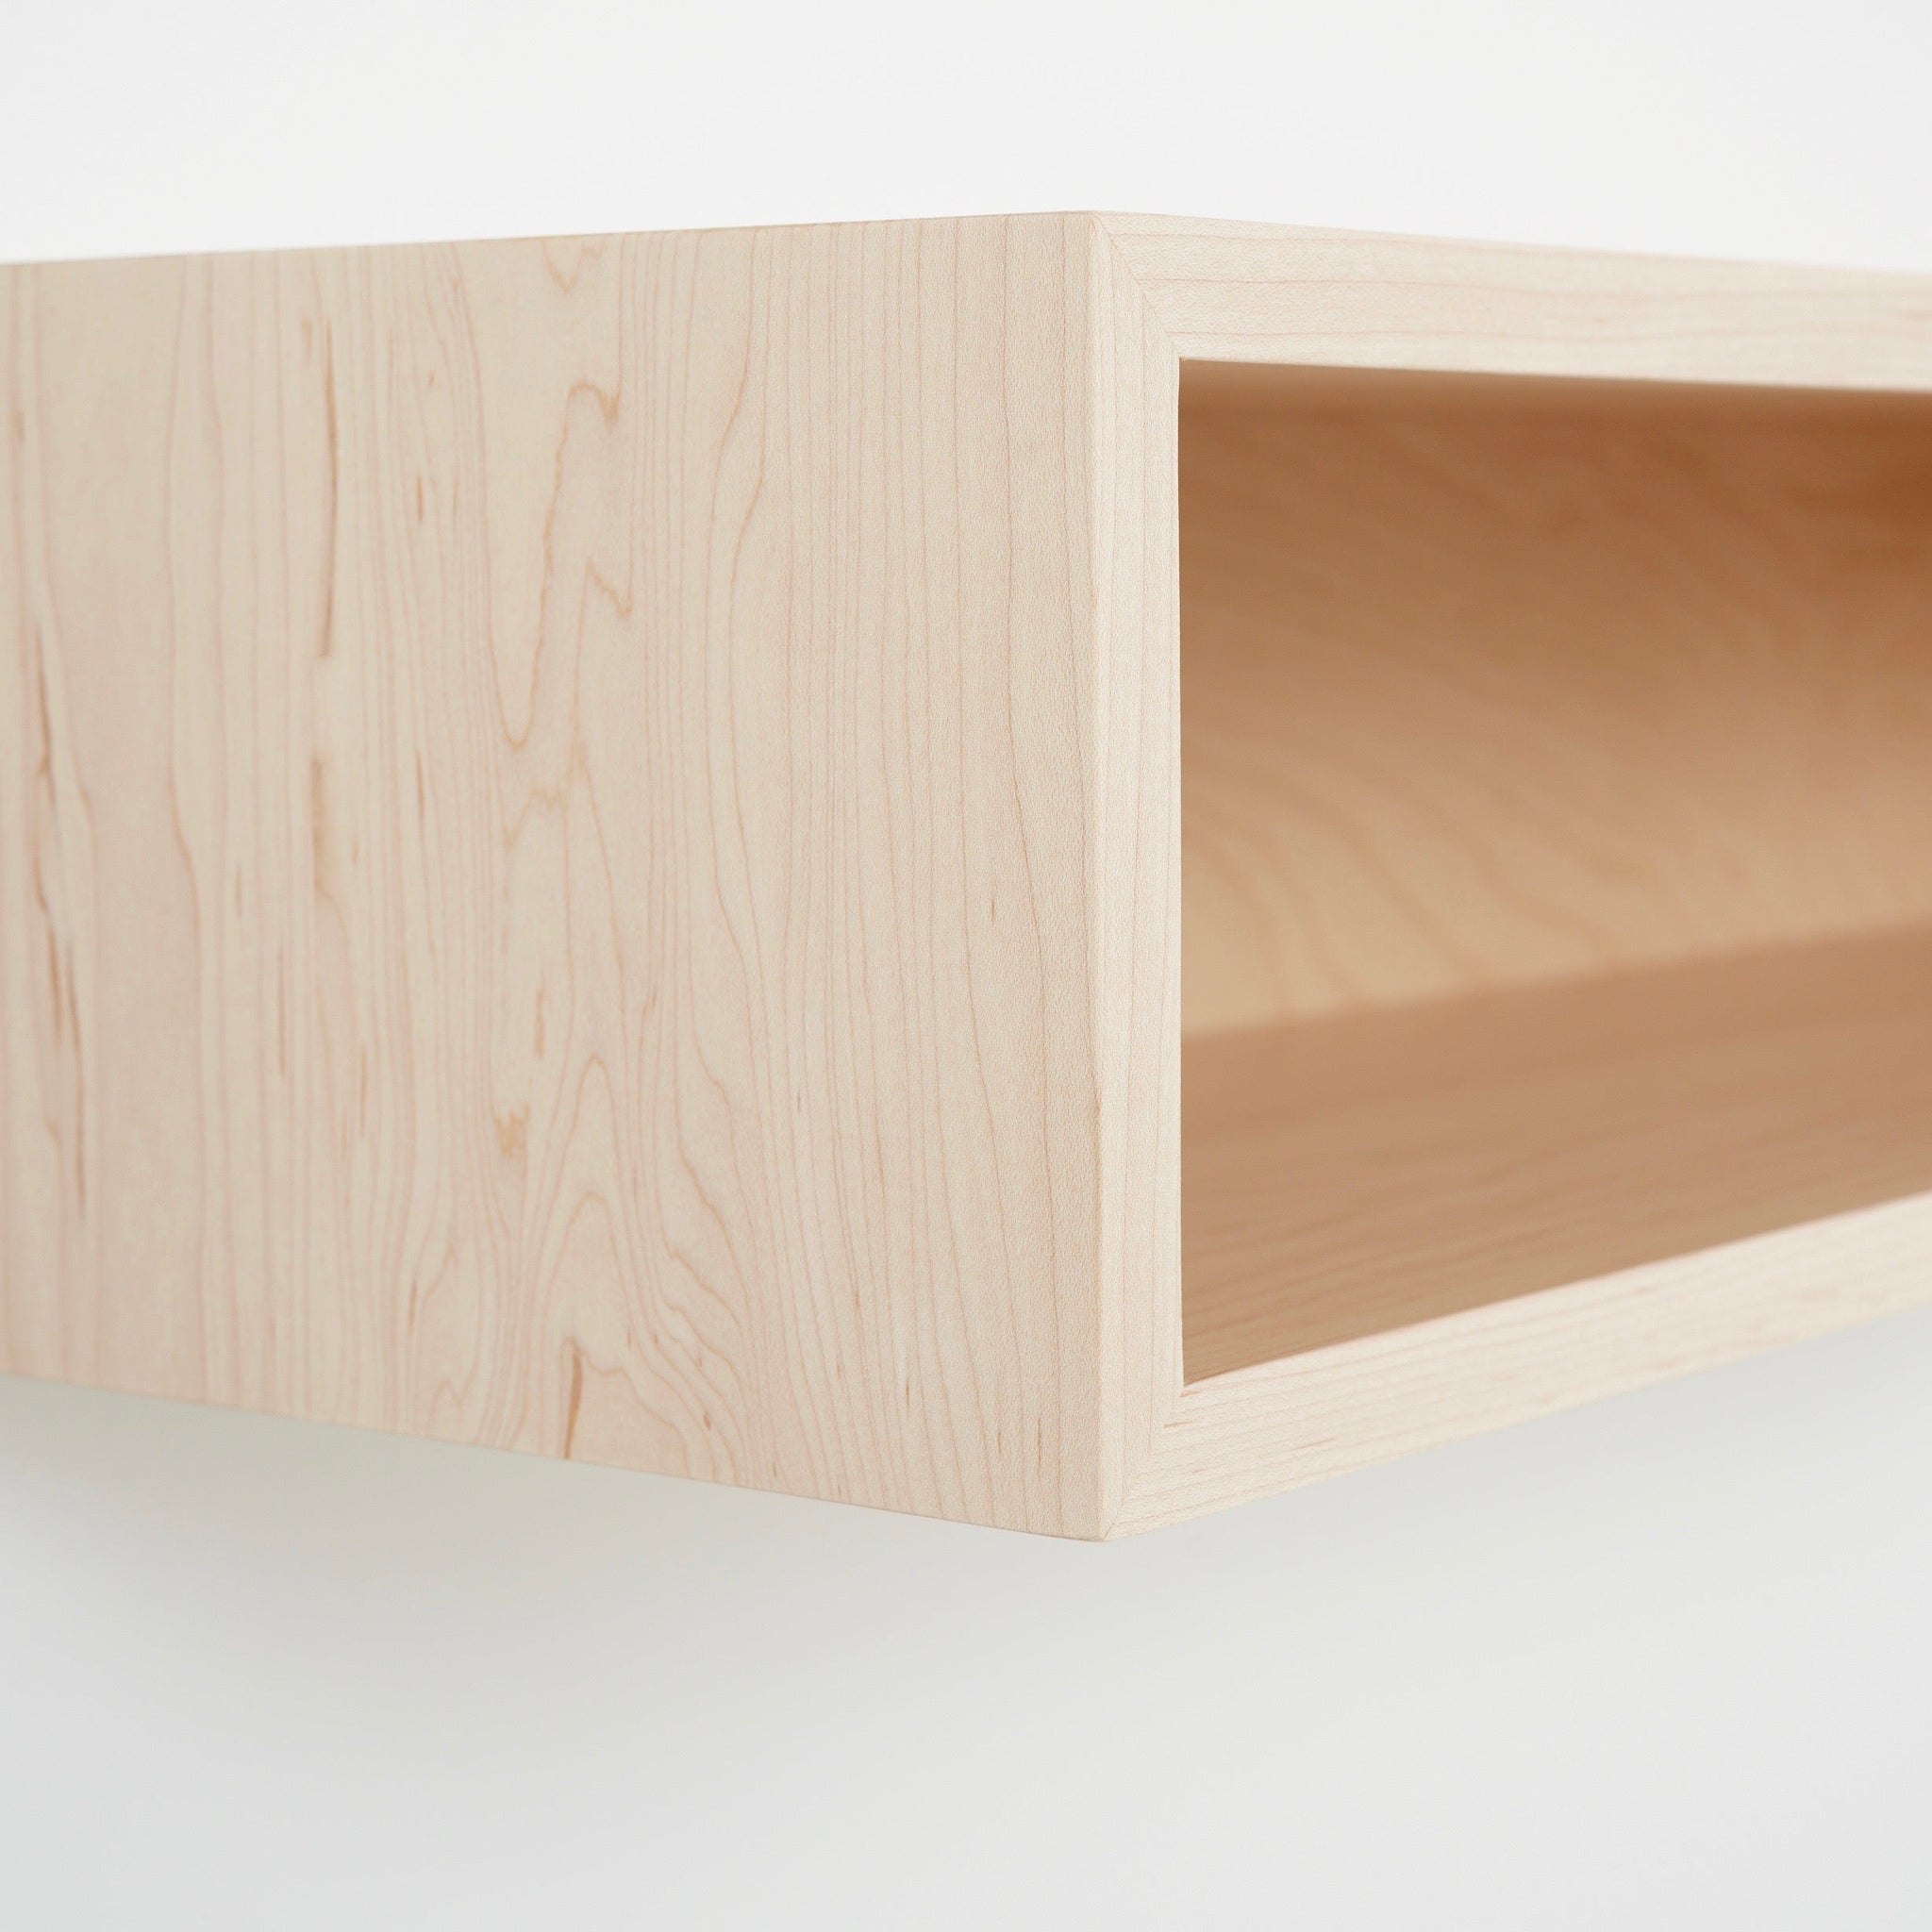 Floating Console Table in Solid Maple - Krøvel Furniture Co. Handmade in Maine